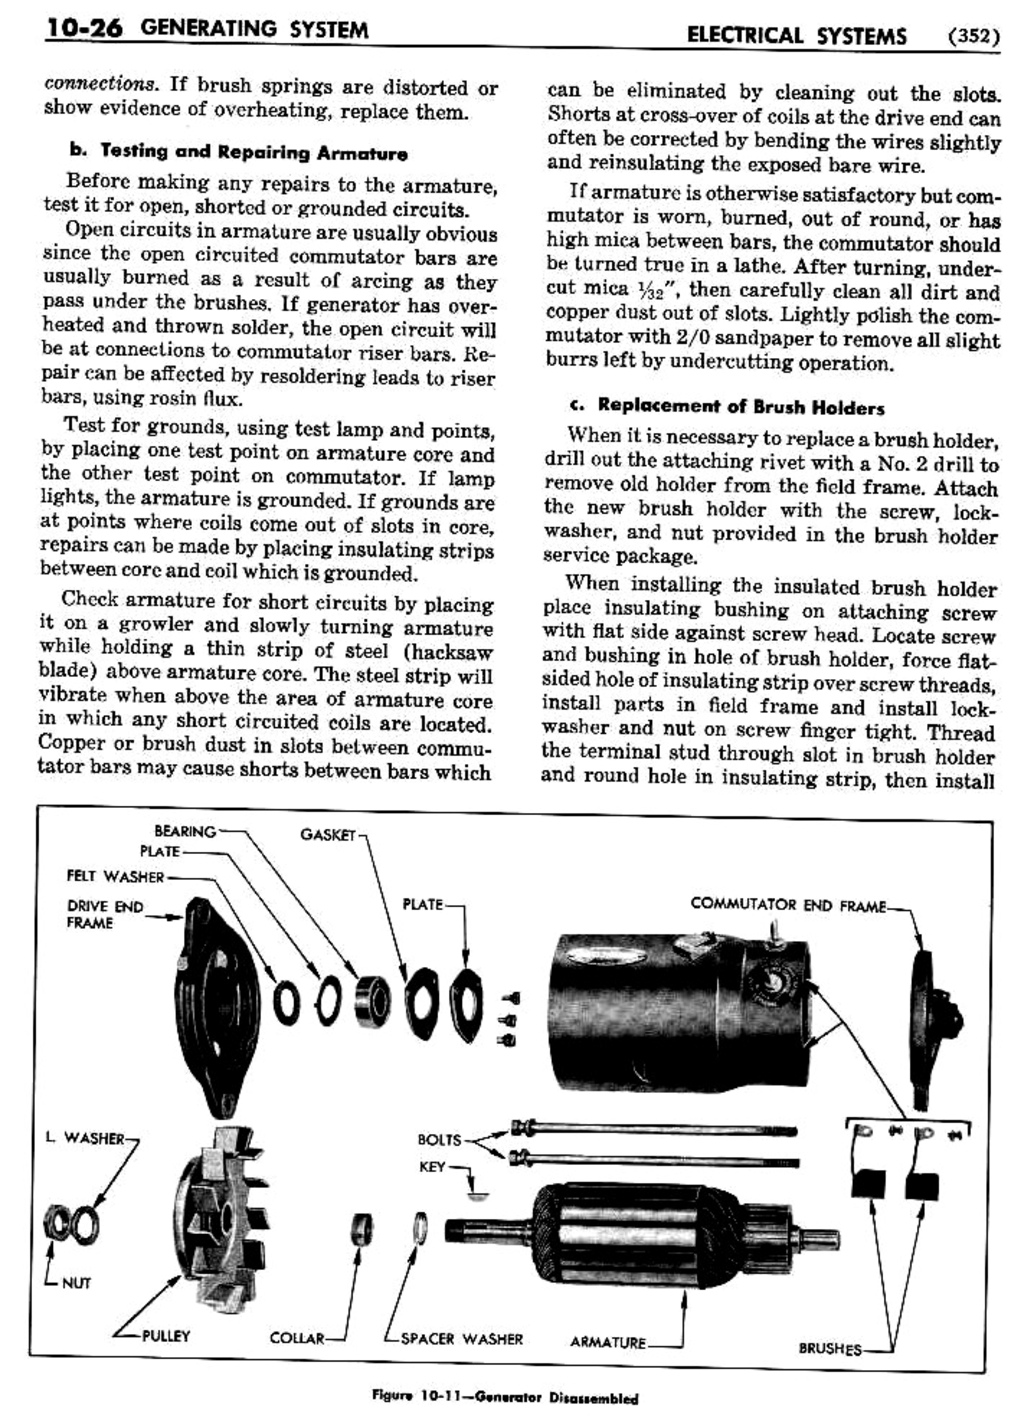 n_11 1956 Buick Shop Manual - Electrical Systems-026-026.jpg